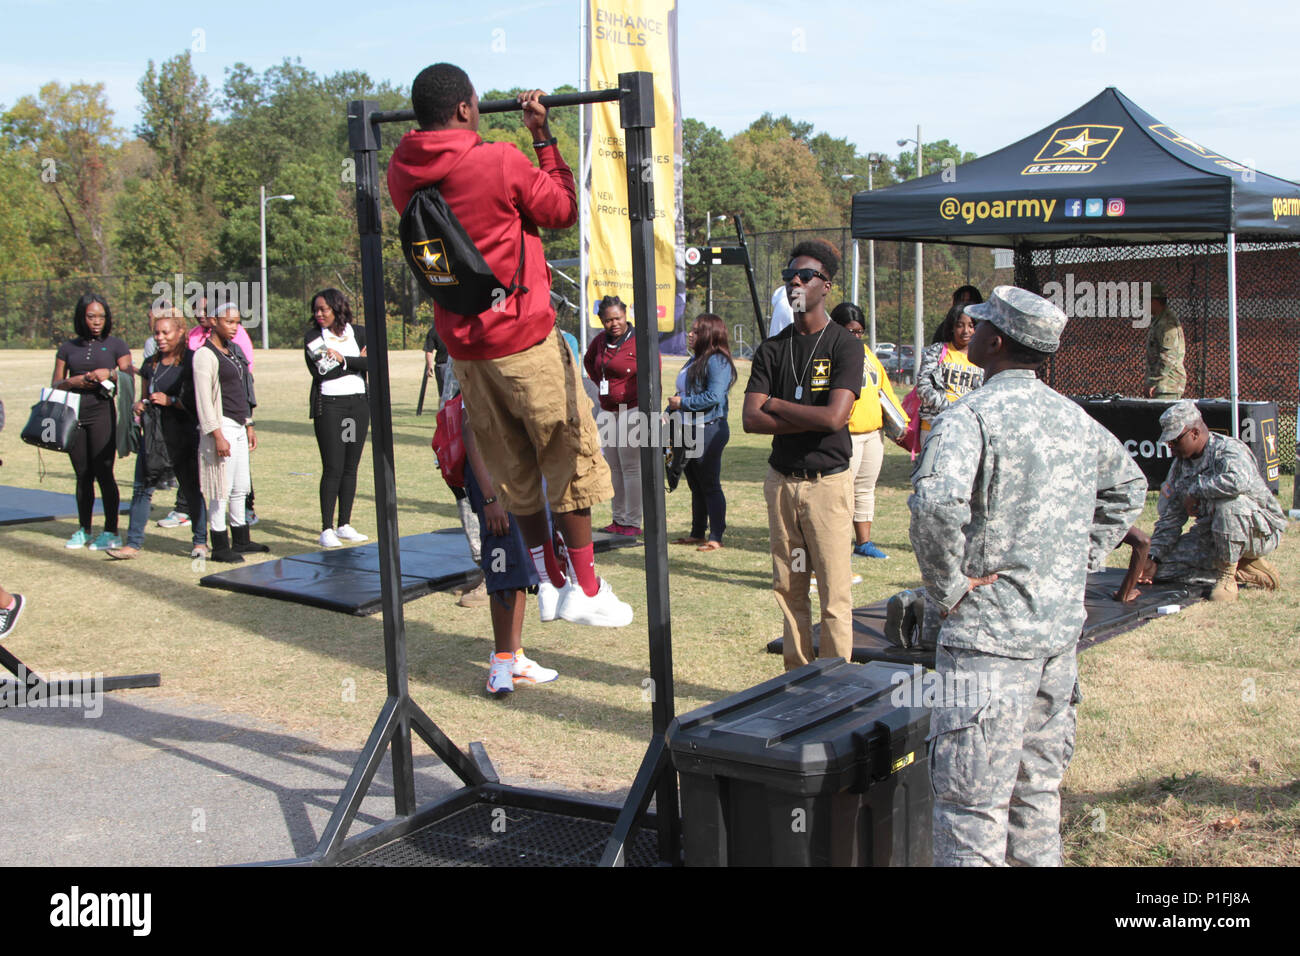 Soldiers of the 318th Chemical Company out of Birmingham, Ala., supported the Historically Black Colleges and Universities (HBCU) Magic City football classic event, Oct. 25-29, 2016, in order to enhance recruiting efforts and to promote awareness of the benefits of Army Reserve service in the HBCU community.  Magic City Classic (MCC) was hosted in the city of Birmingham and featured instate rivals Alabama State University and Alabama A&M University. These two HBCUs are the largest in the State of Alabama. The MCC is managed by the Alabama Sports Foundation and attracts over 70,000 fans each ye Stock Photo